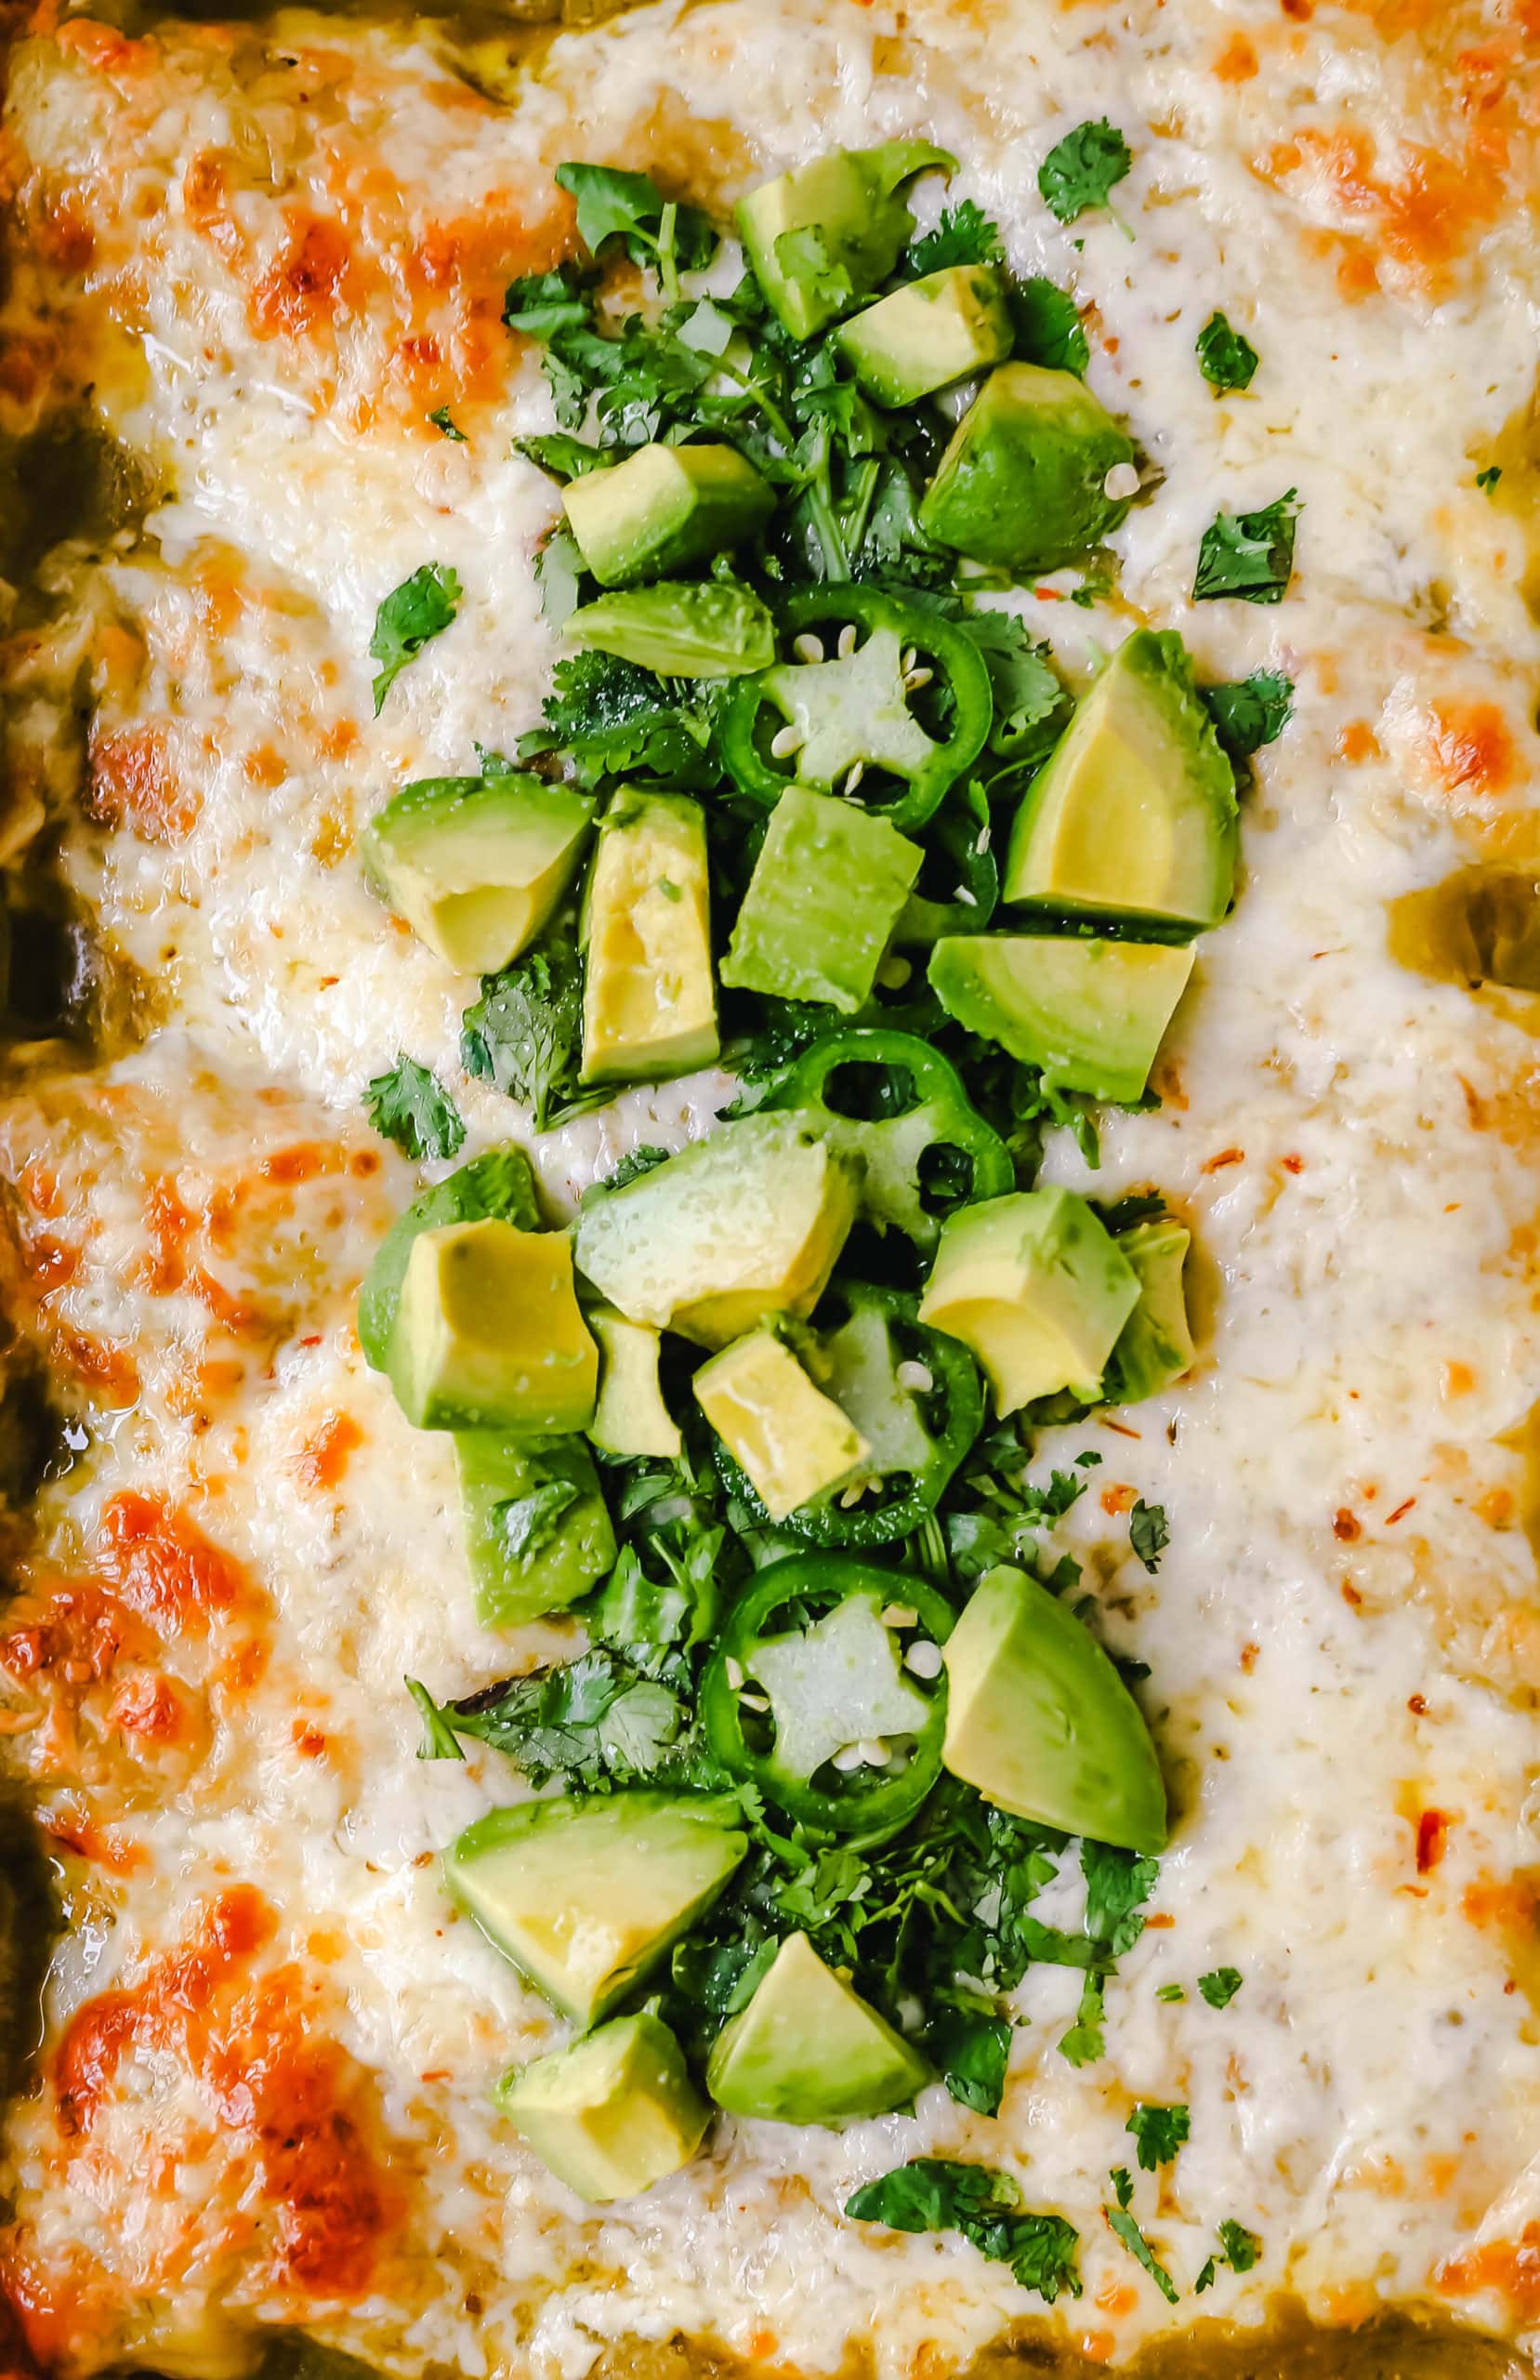 Creamy Green Chile Chicken Enchiladas Creamy chicken enchiladas stuffed with a cream cheese and sour cream green chile chicken rolled into corn tortillas and topped with green enchilada sauce and pepper jack cheese. The best creamy chicken enchiladas recipe! www.moderrnhoney.com #enchiladas #mexicanfood